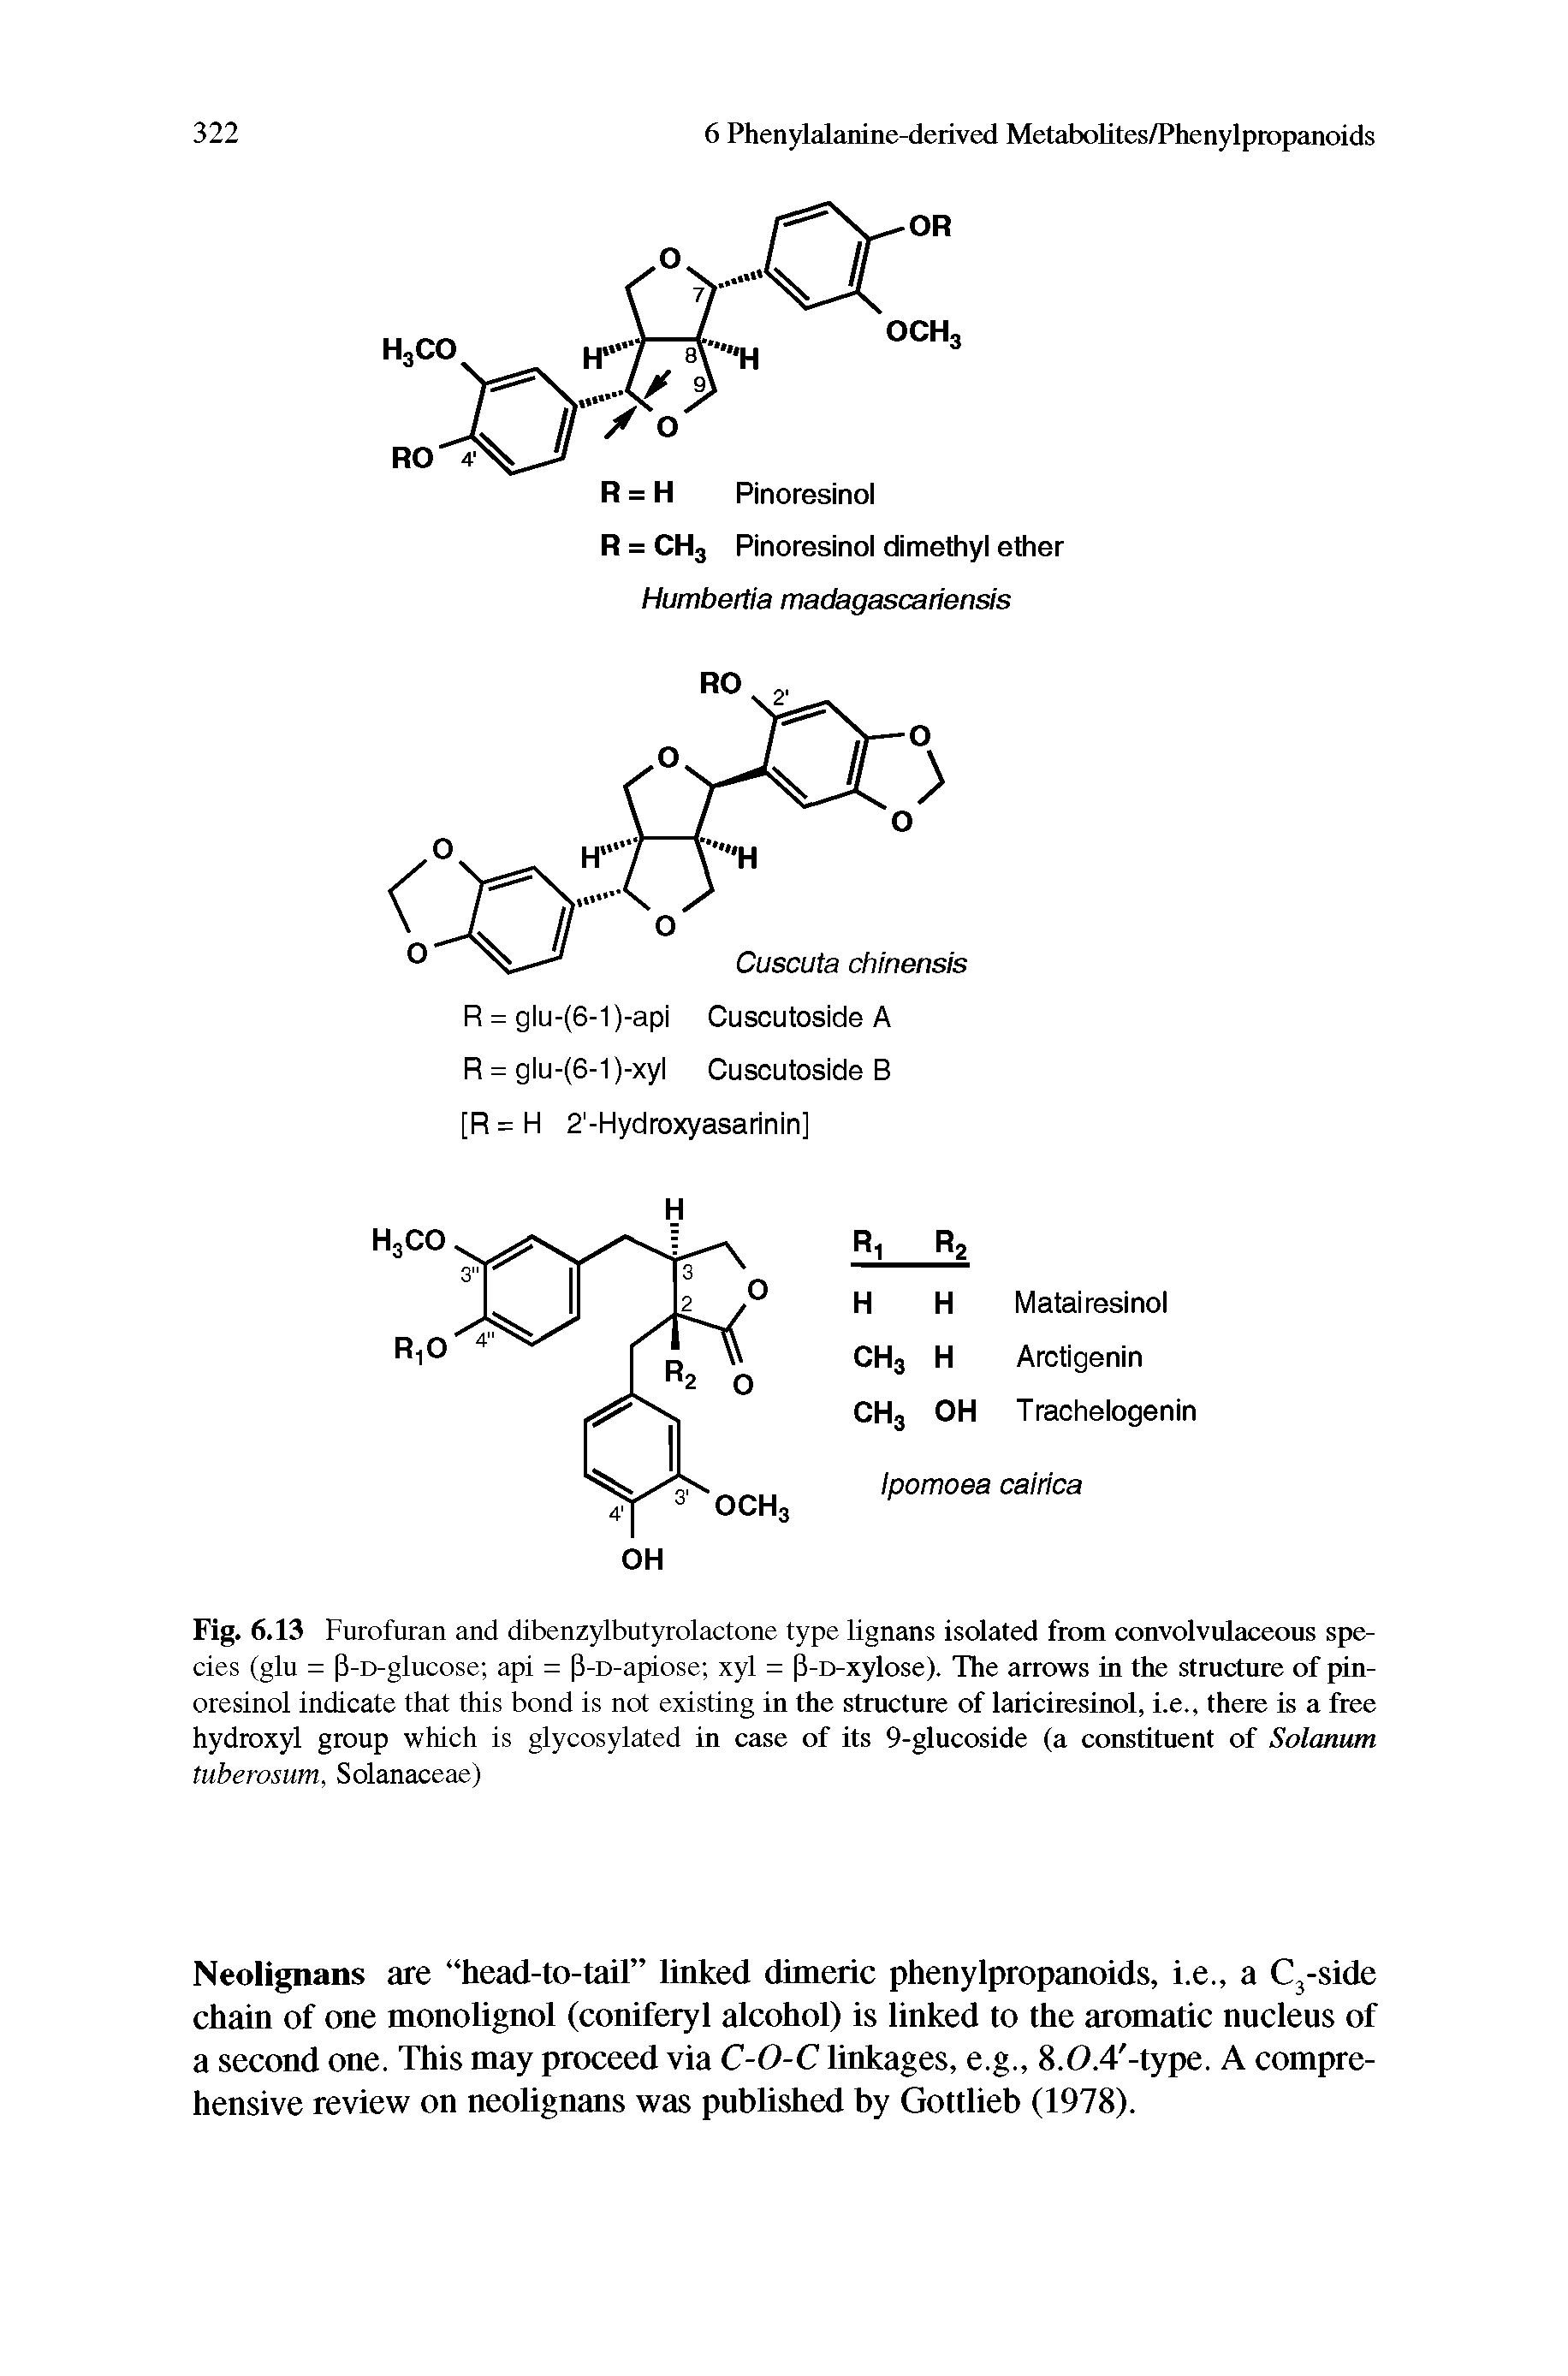 Fig. 6.13 Furofuran and dibenzylbutyrolactone type lignans isolated from convolvulaceous species (glu = P-D-glucose api = P-D-apiose xyl = P-D-xylose). The arrows in the structure of pinoresinol indicate that this bond is not existing in the structure of lariciresinol, i.e., there is a free hydroxyl group which is glycosylated in case of its 9-glucoside (a constituent of Solarium tuberosum, Solanaceae)...